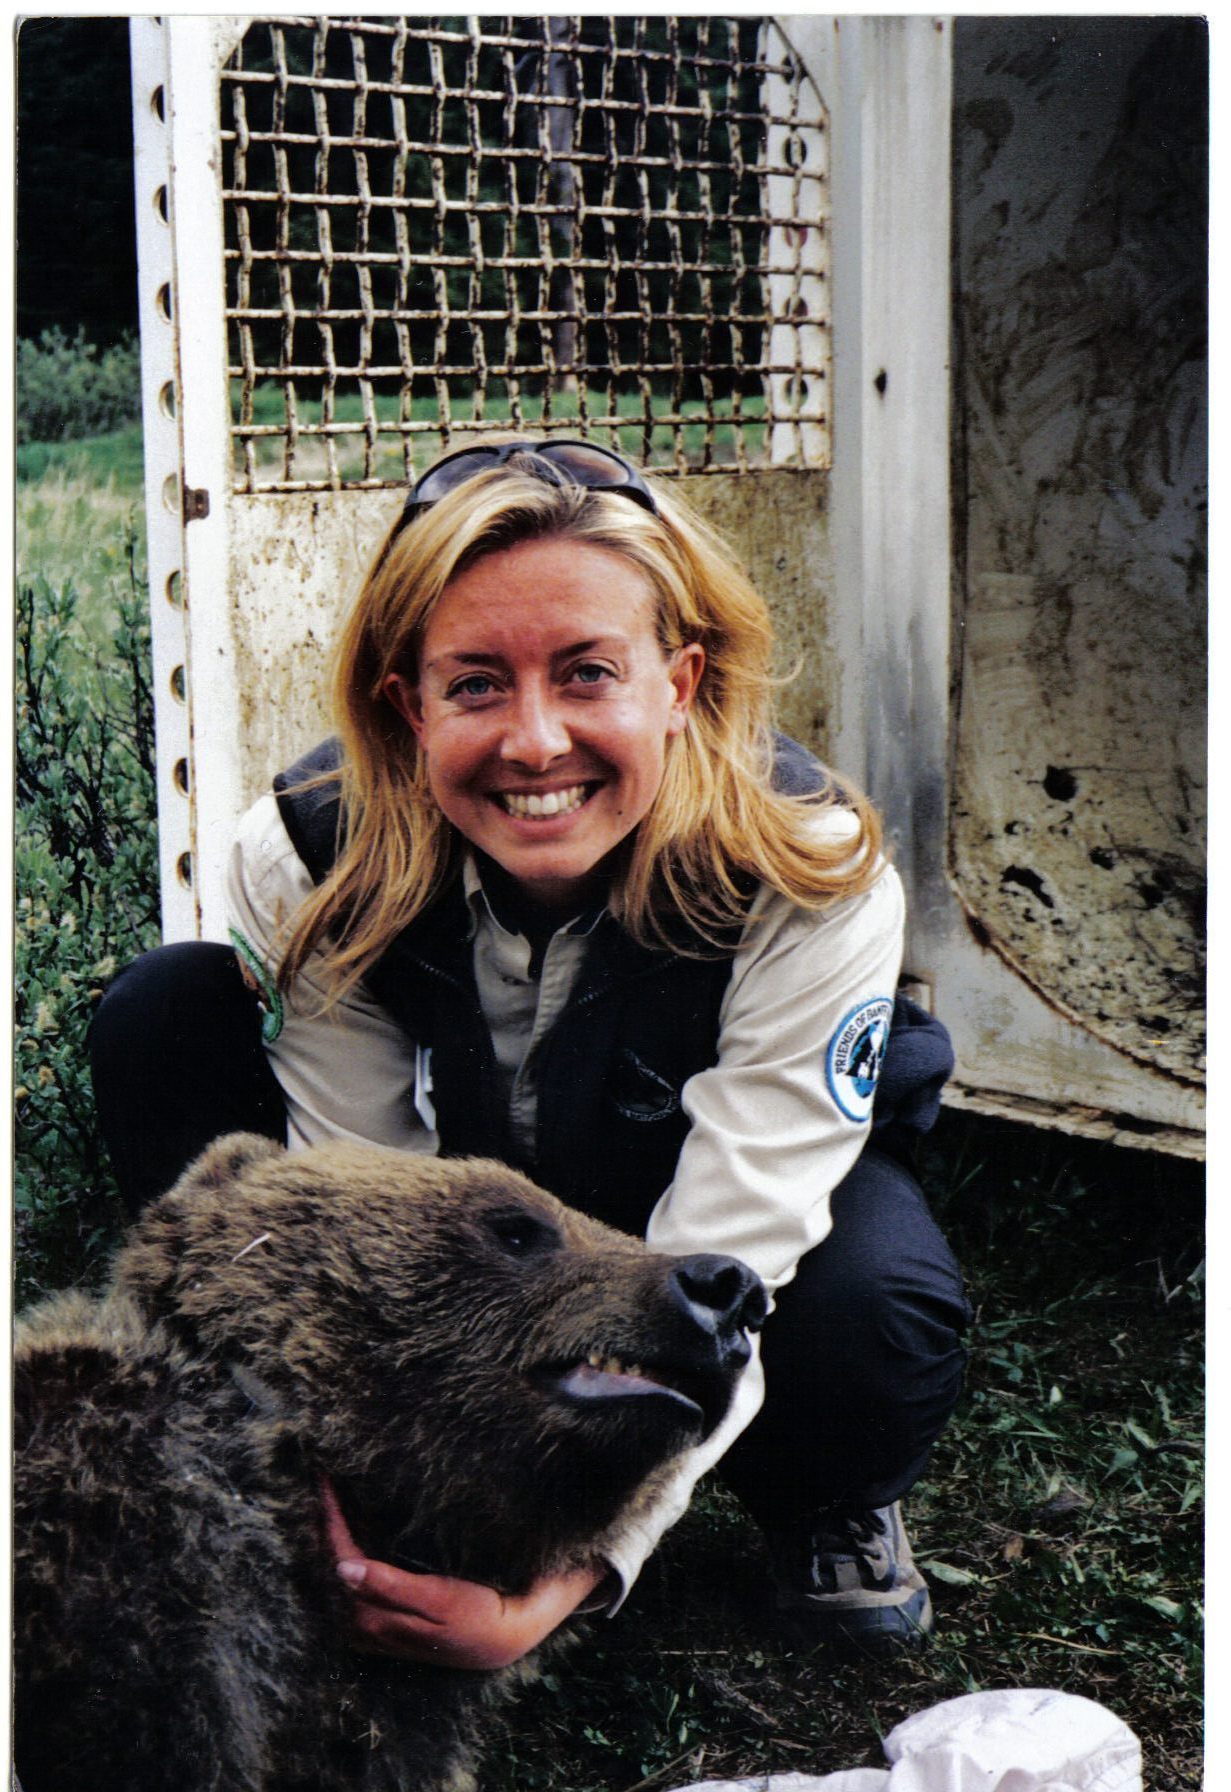 After earning her outdoor recreation and history degrees, Kim completed a Bachelor of Education in 2005. “I encourage people to follow their passion to a career that is satisfying and makes the world a better place.” In this photo Kim helps relocate a grizzly.